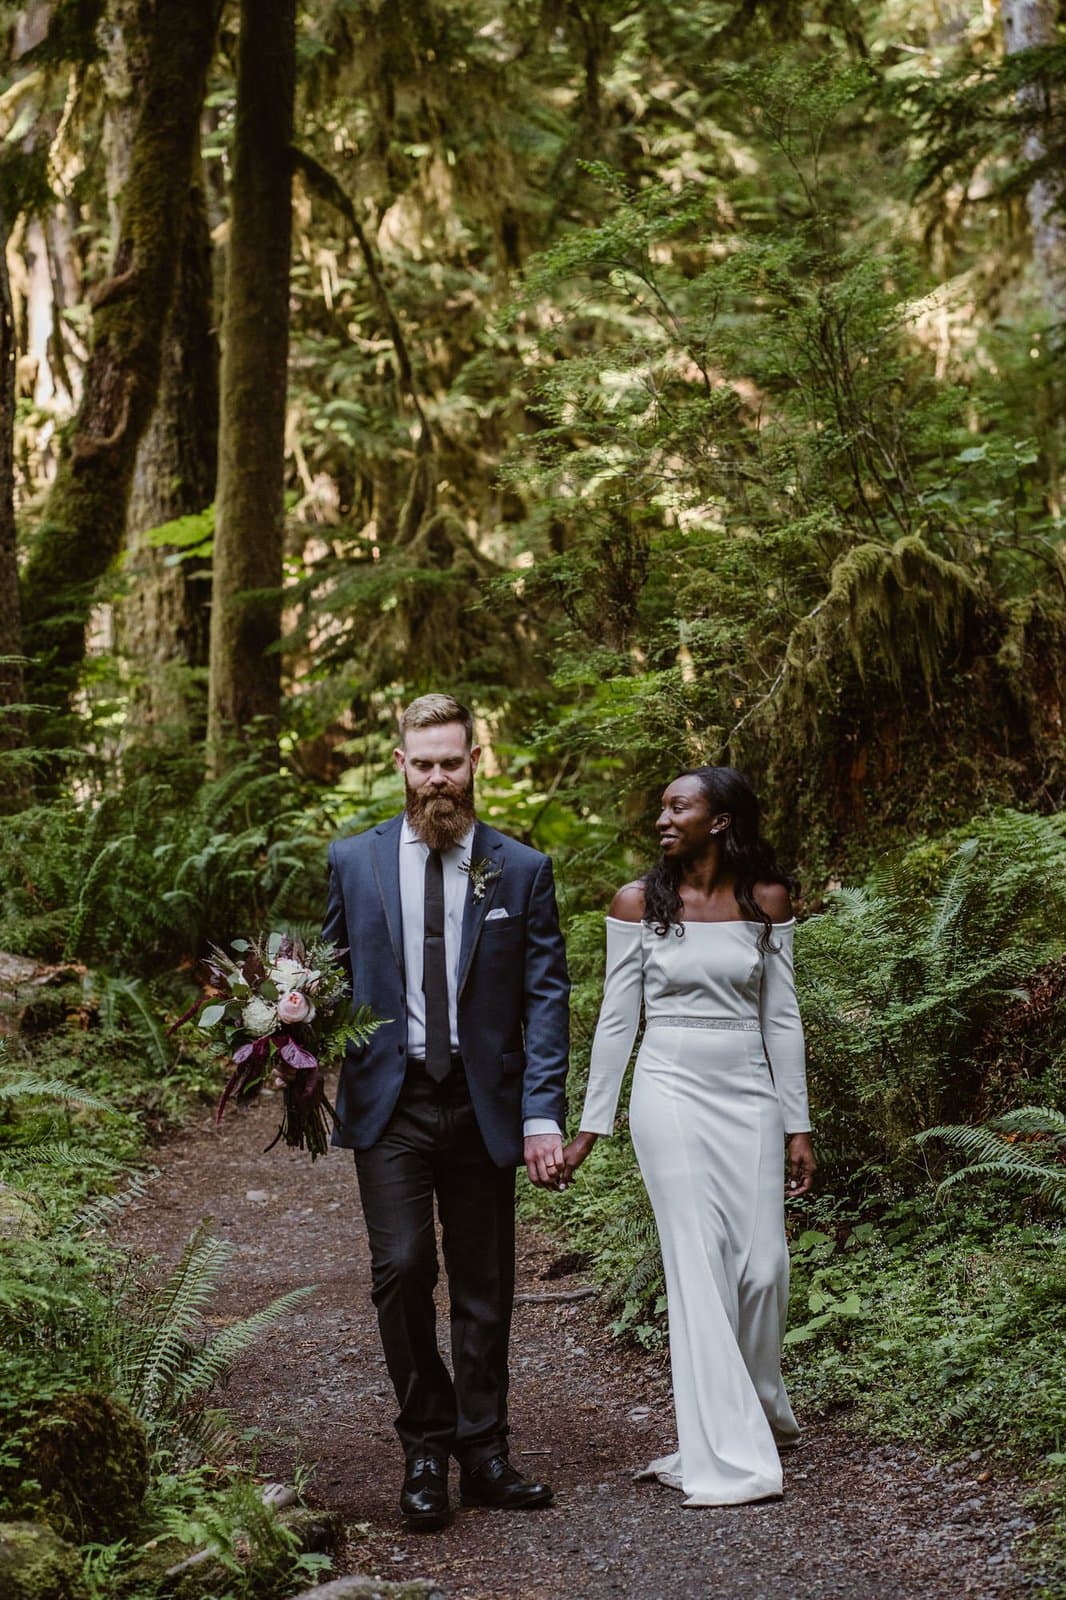 Bride and groom walking through Olympic National Park.